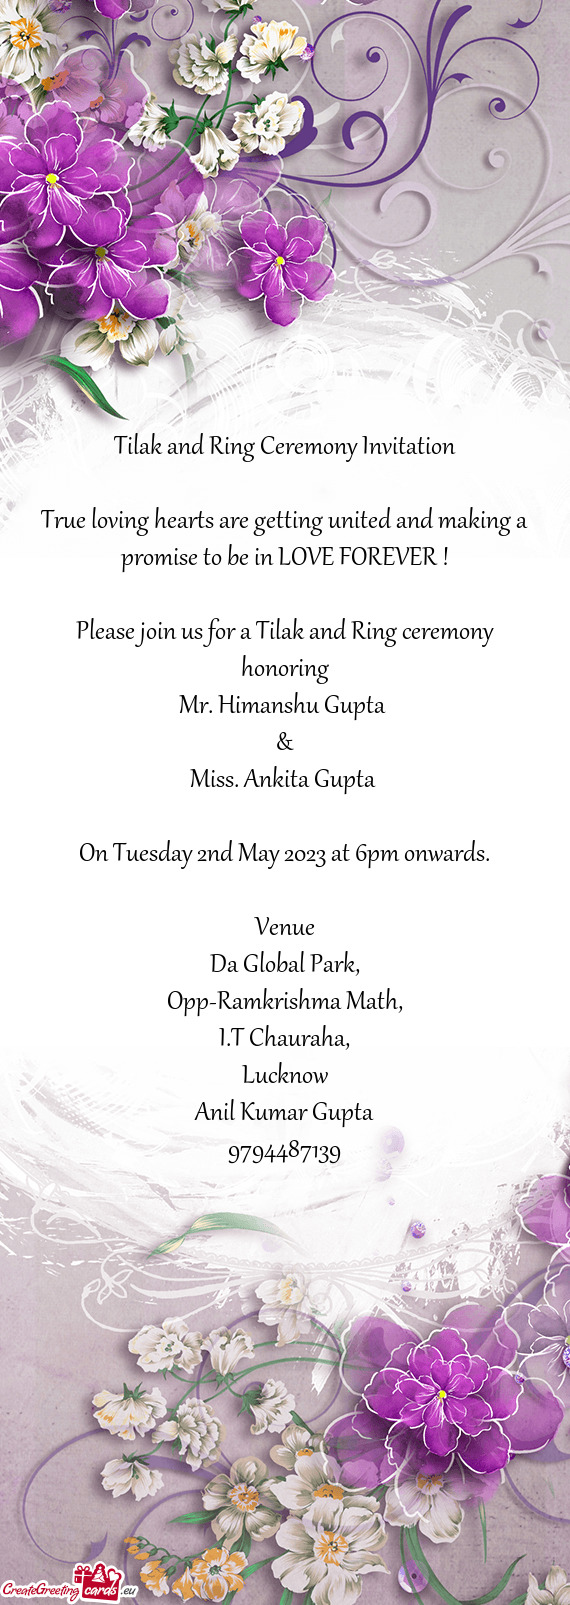 Please join us for a Tilak and Ring ceremony honoring